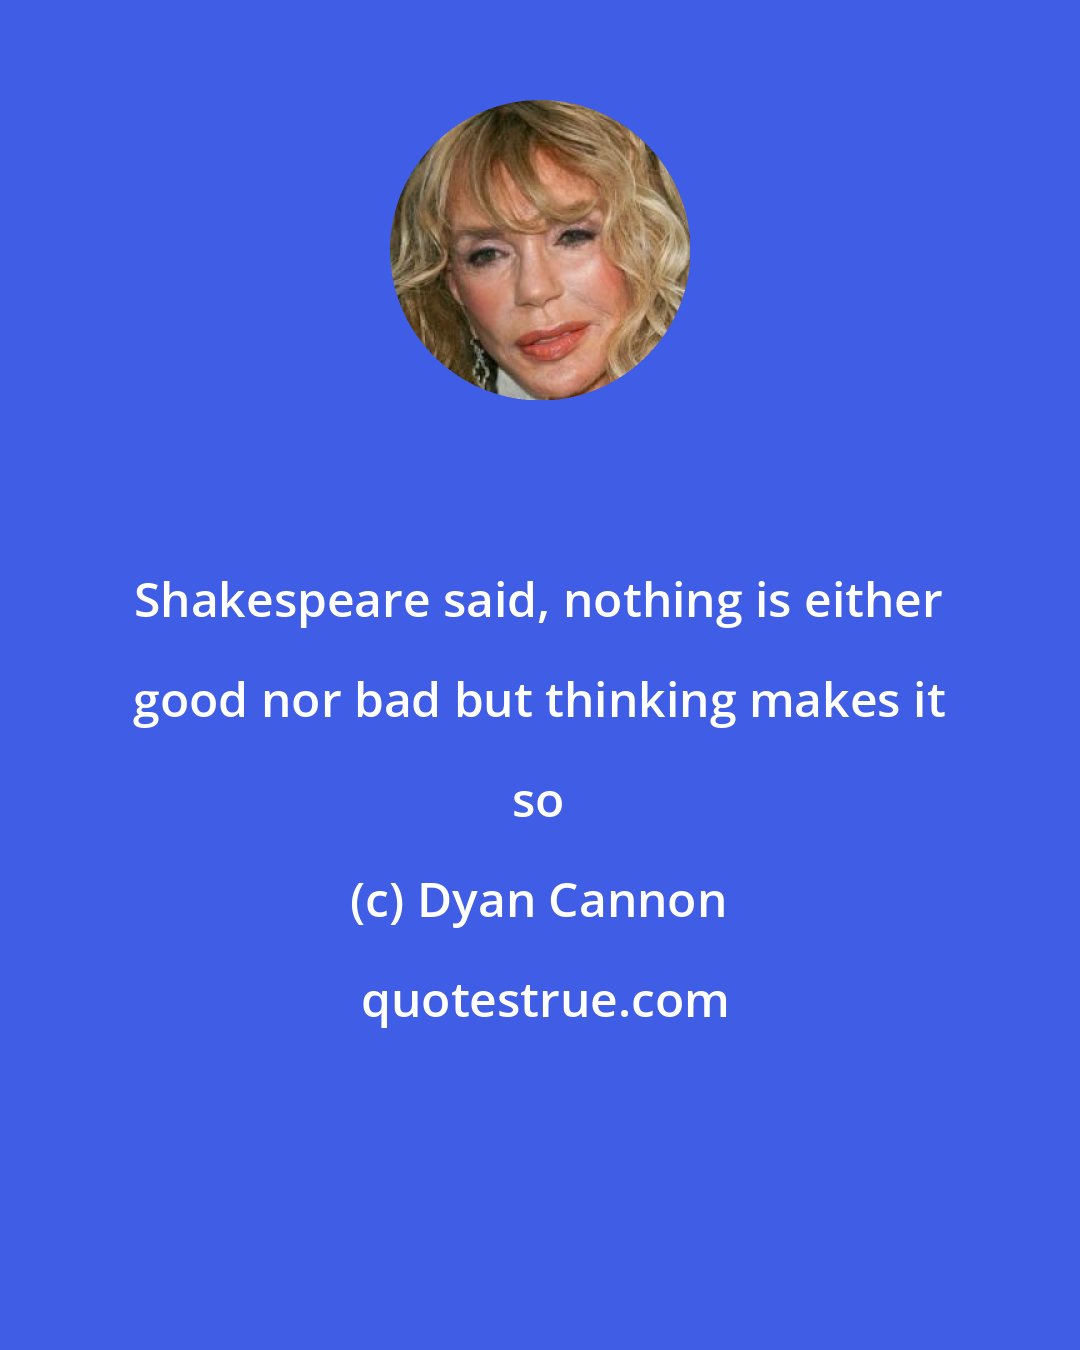 Dyan Cannon: Shakespeare said, nothing is either good nor bad but thinking makes it so